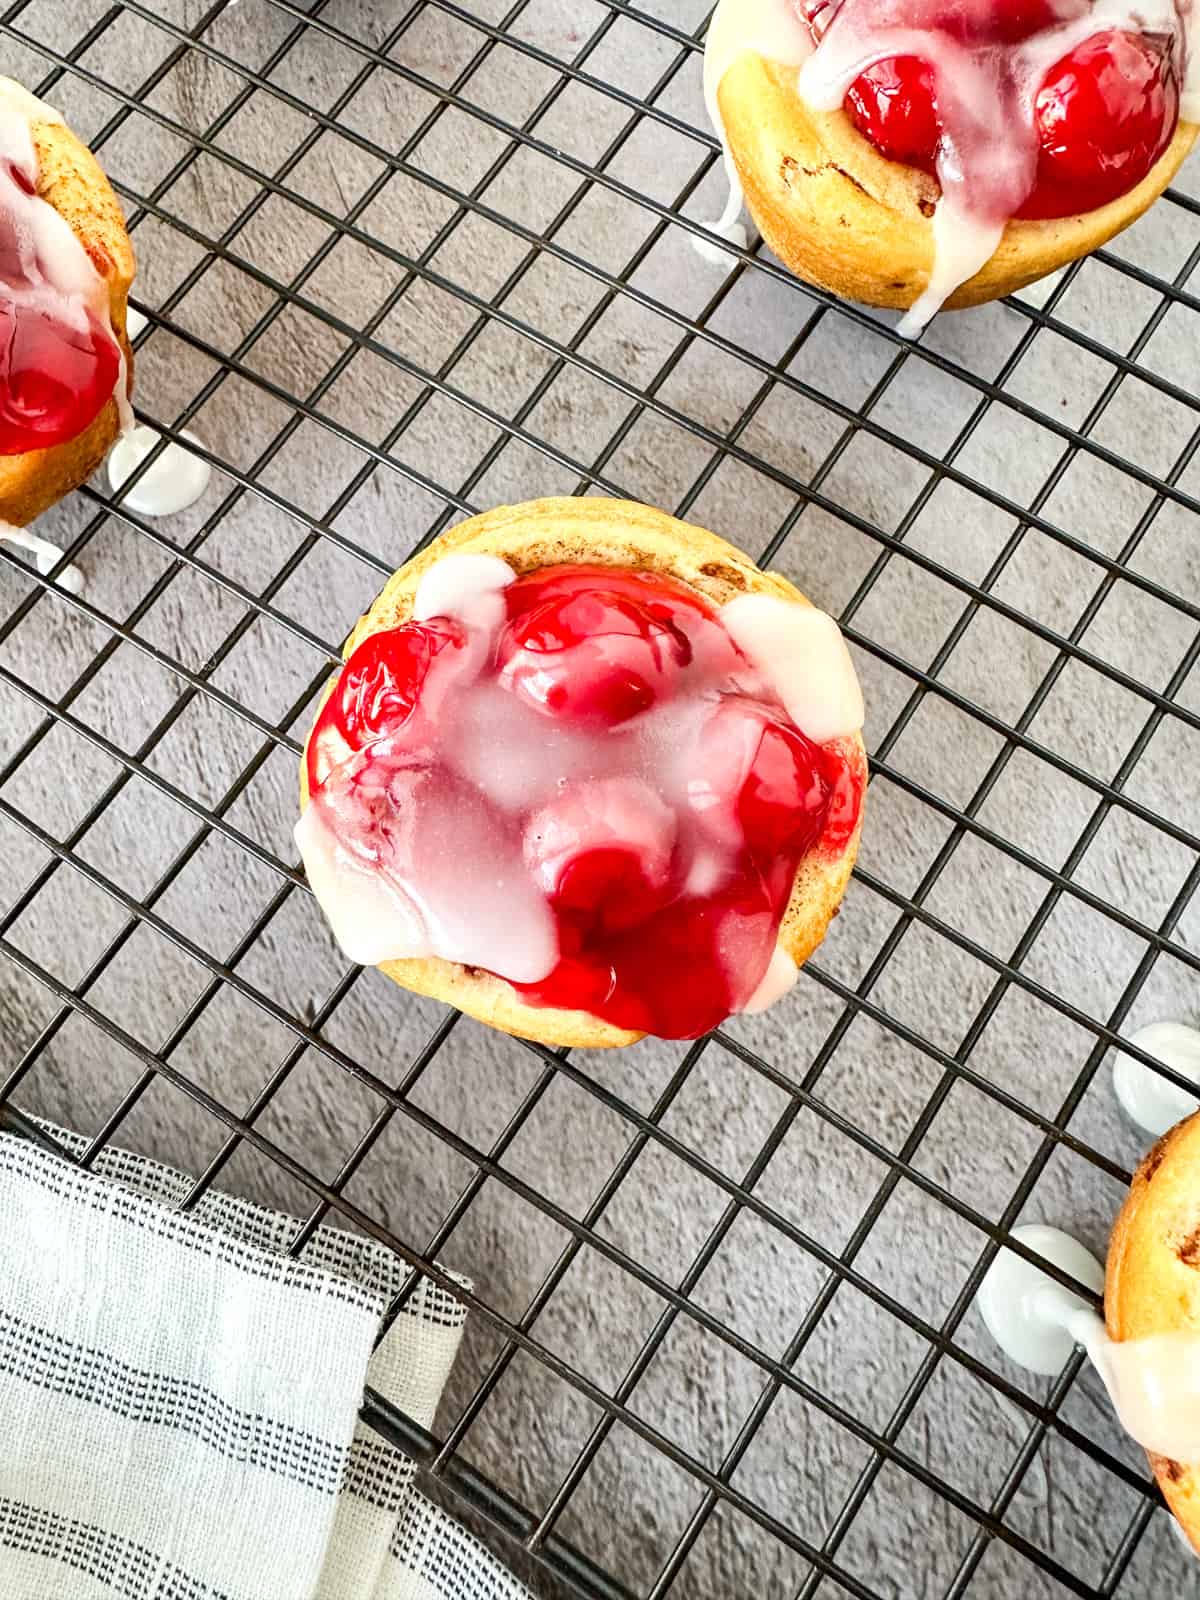 A Cherry Pie cup with icing drizzled over the top on a cooling rack.